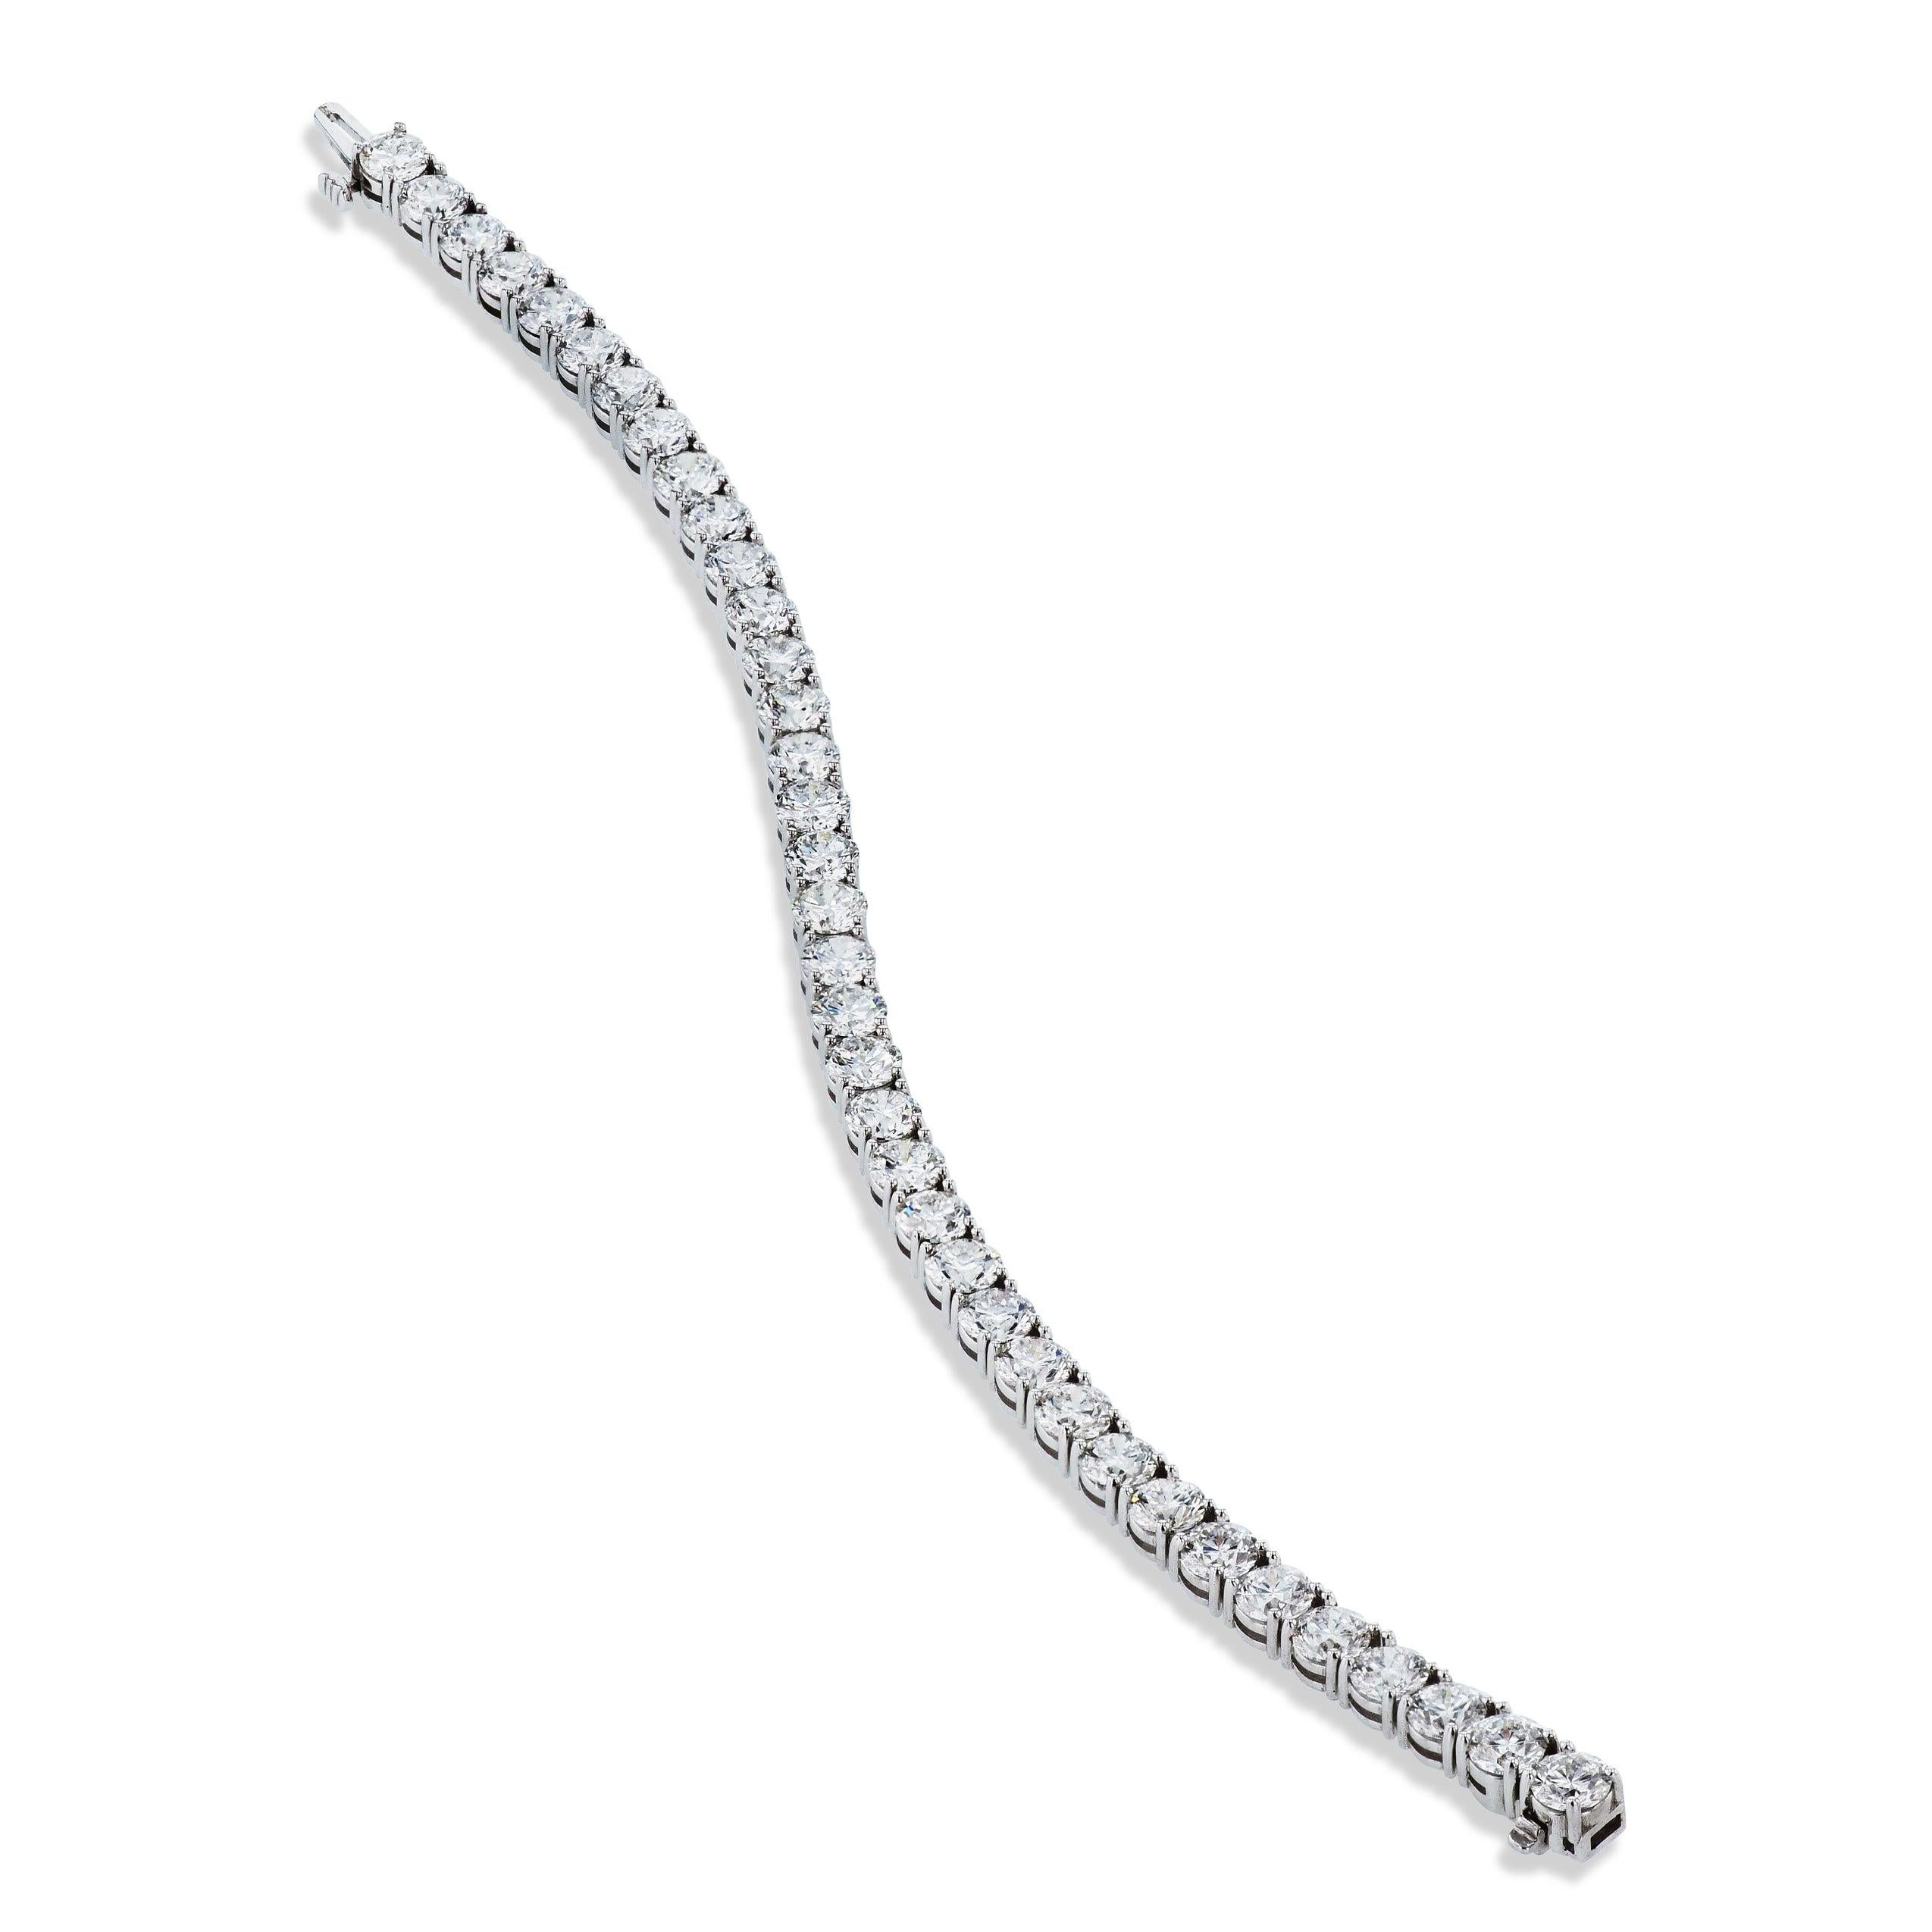 This handmade H&H Collection tennis bracelet is composed of 37 diamonds with a total carat weight of 15.01. This magnificent 7